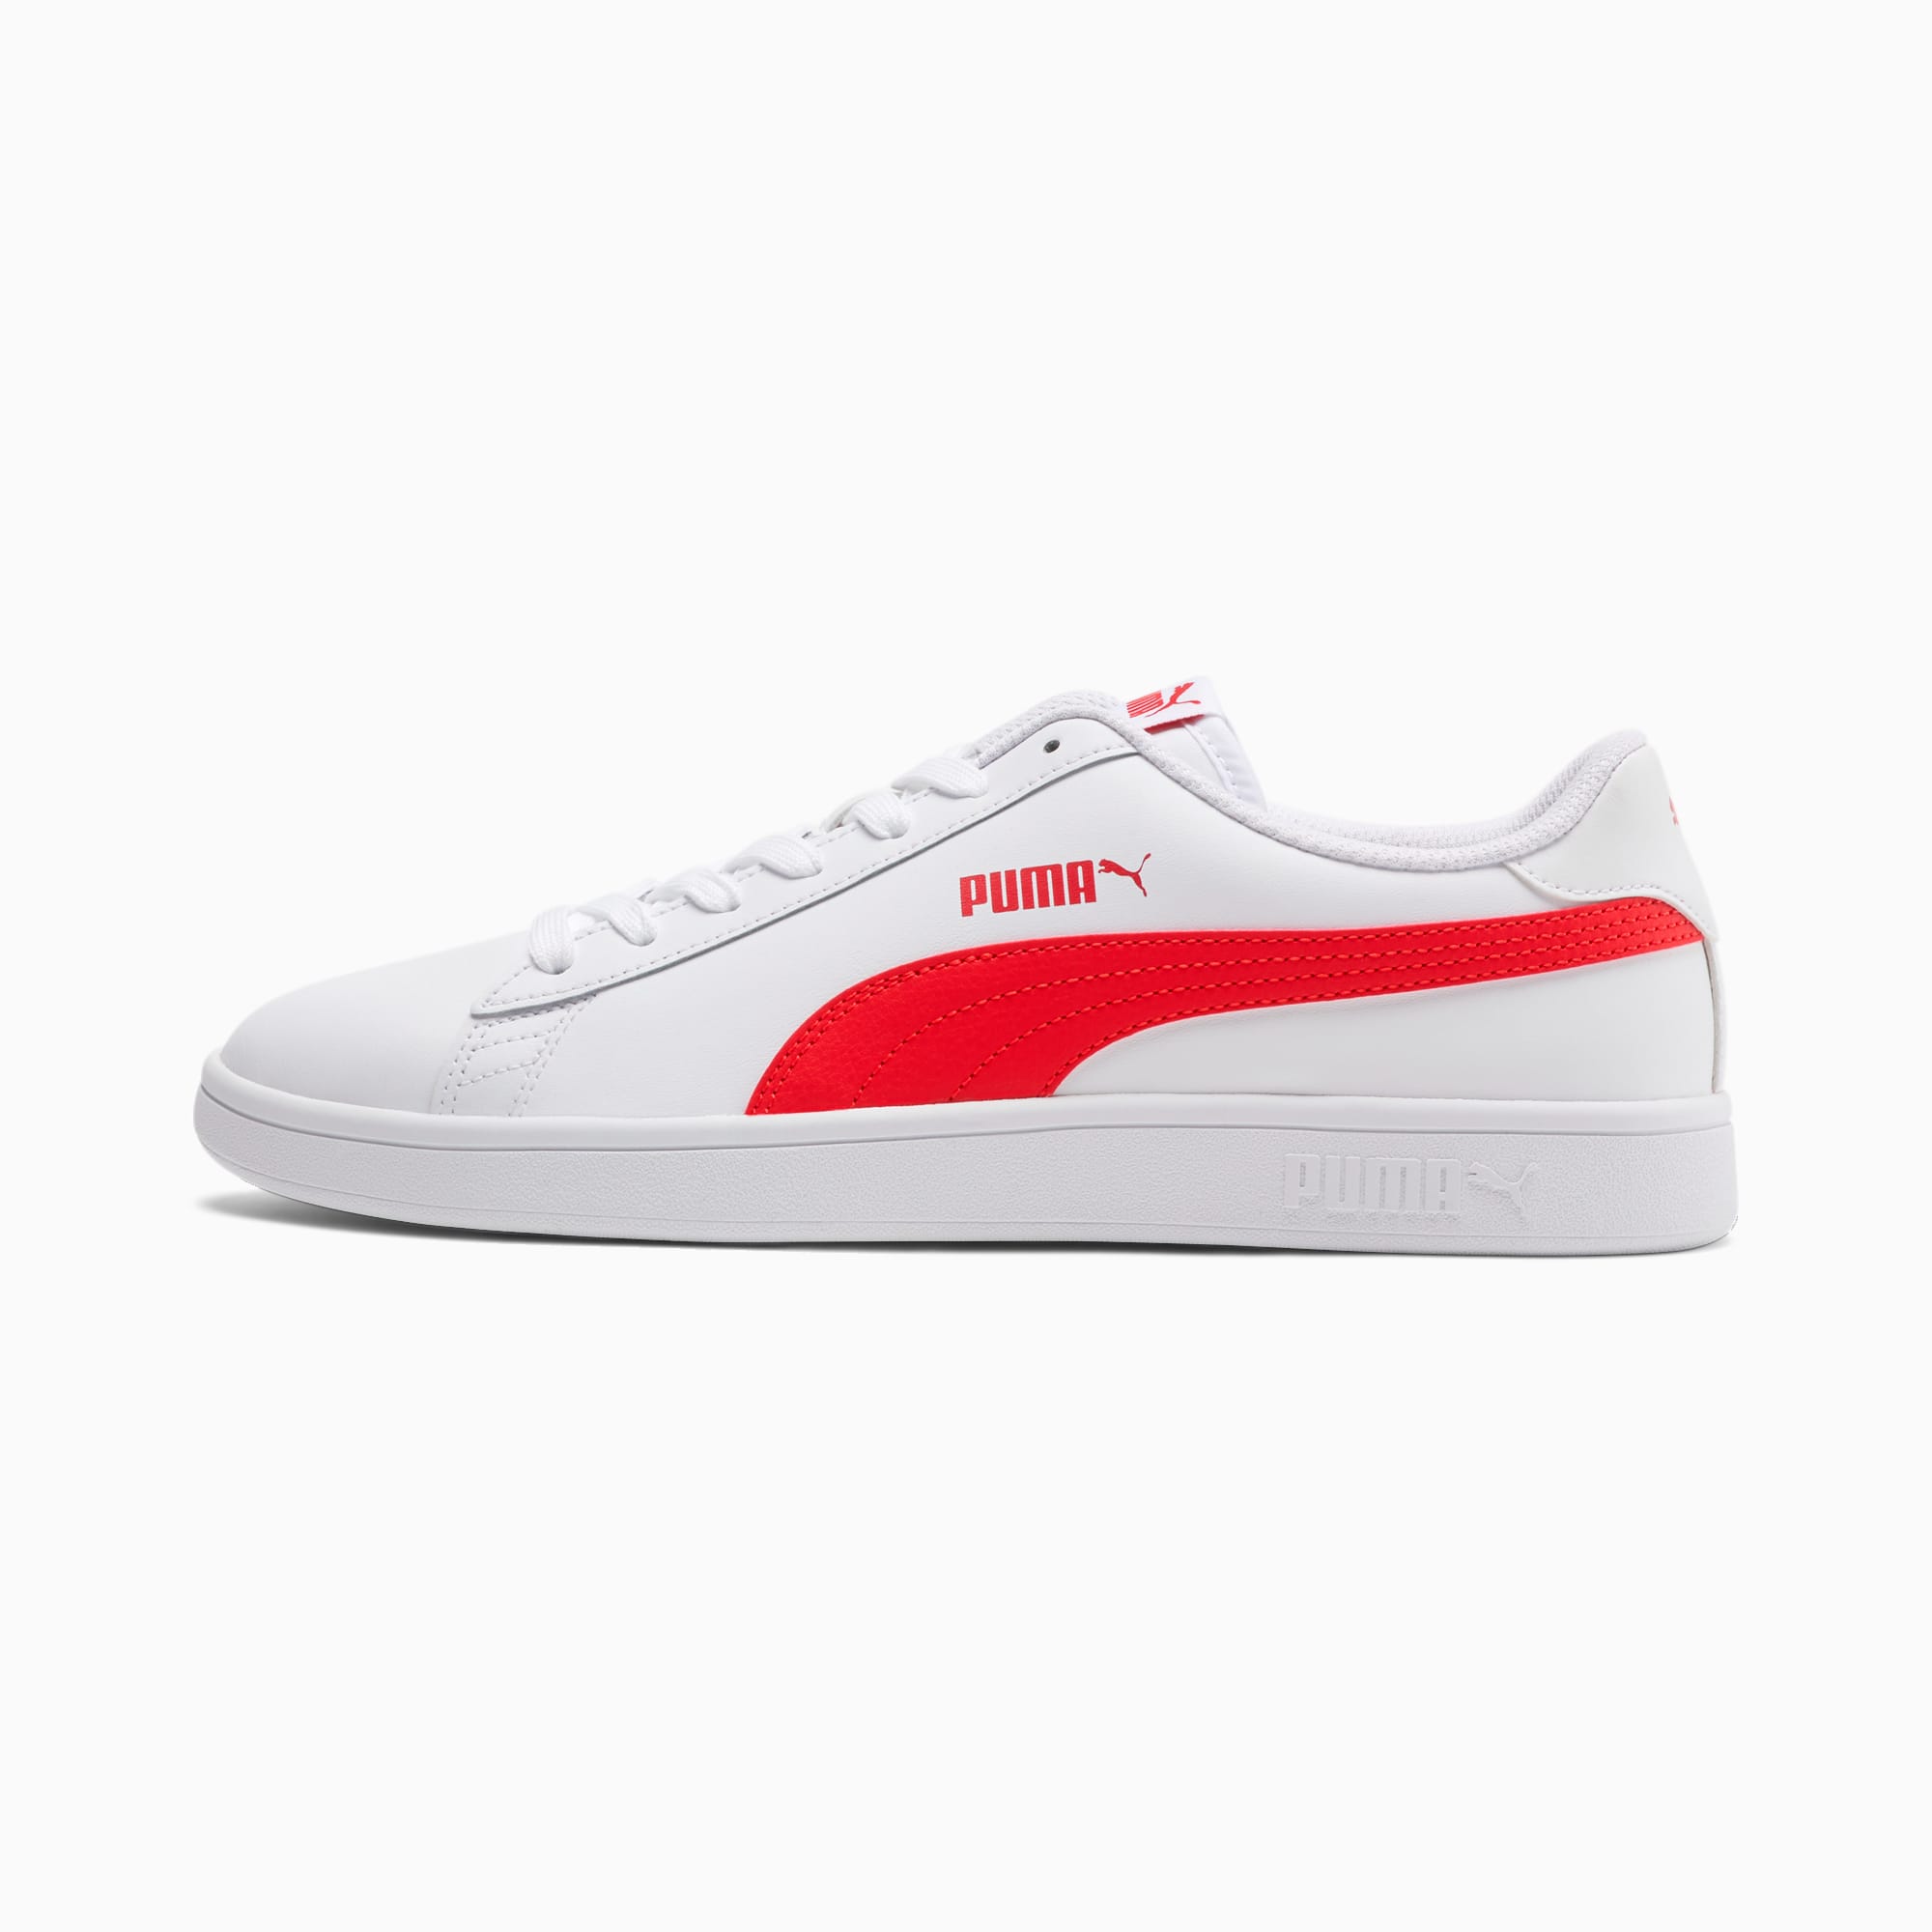 Chaussure Puma Smash v2 L, Blanc/Gris/Rouge, Taille 46, Chaussures